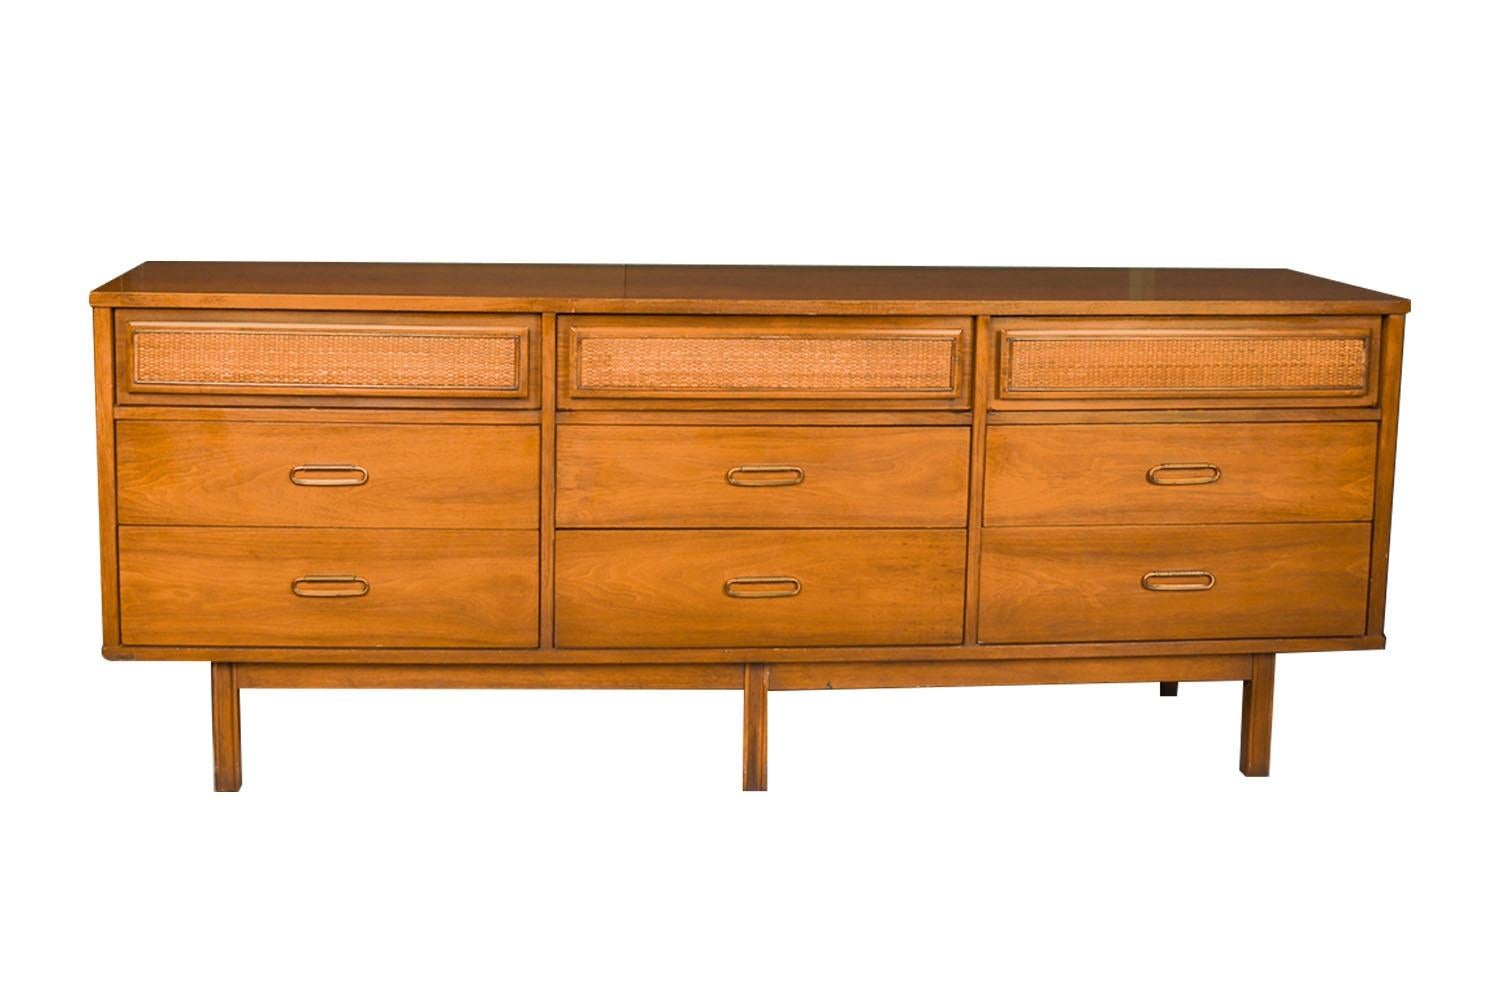 A beautiful mid-century long dresser with cane front drawer panels. Exceptional construction and style. This is a very simple yet modern 9 drawer design. Each drawer has beautiful walnut medium tones with attractive metal brass pulls. Top three